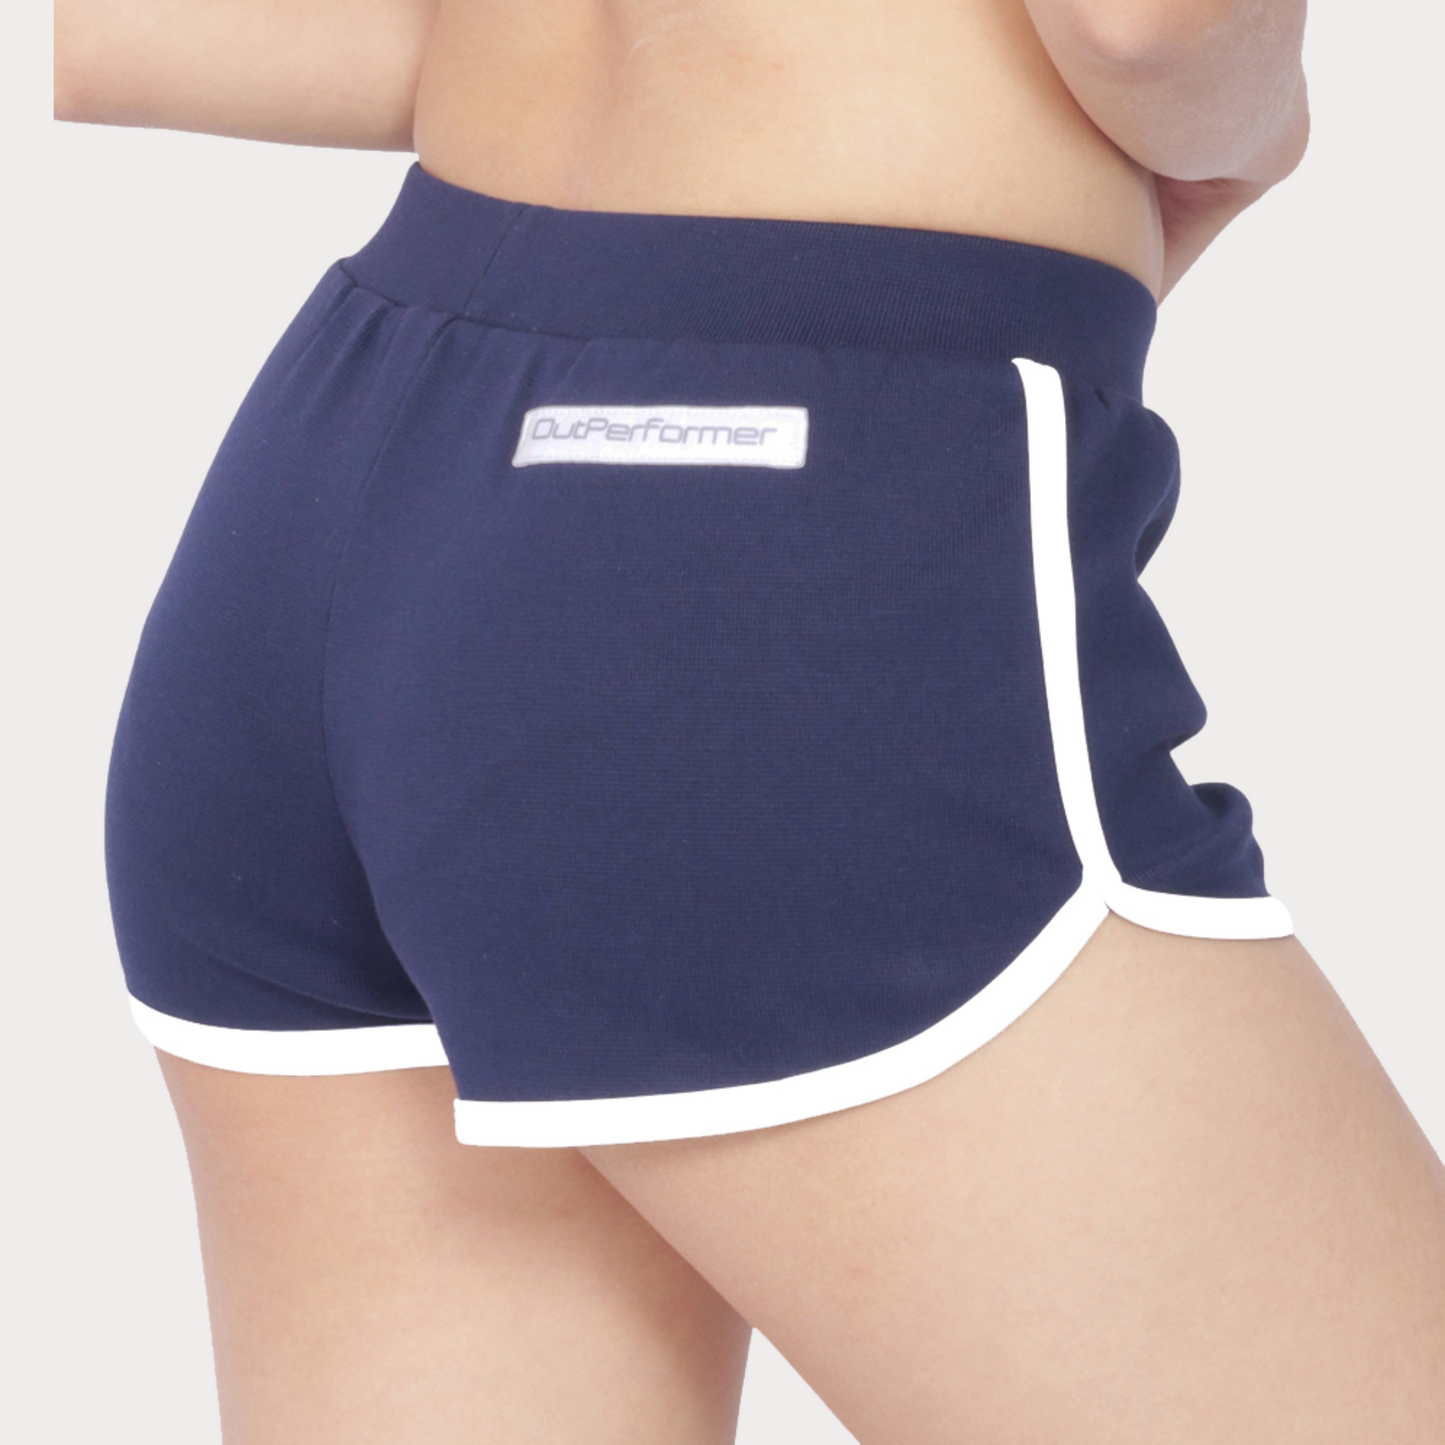 Women's Shorts Activewear / Sportswear - Women's Dolphin Ribbed Shorts - S / Navy - Outperformer